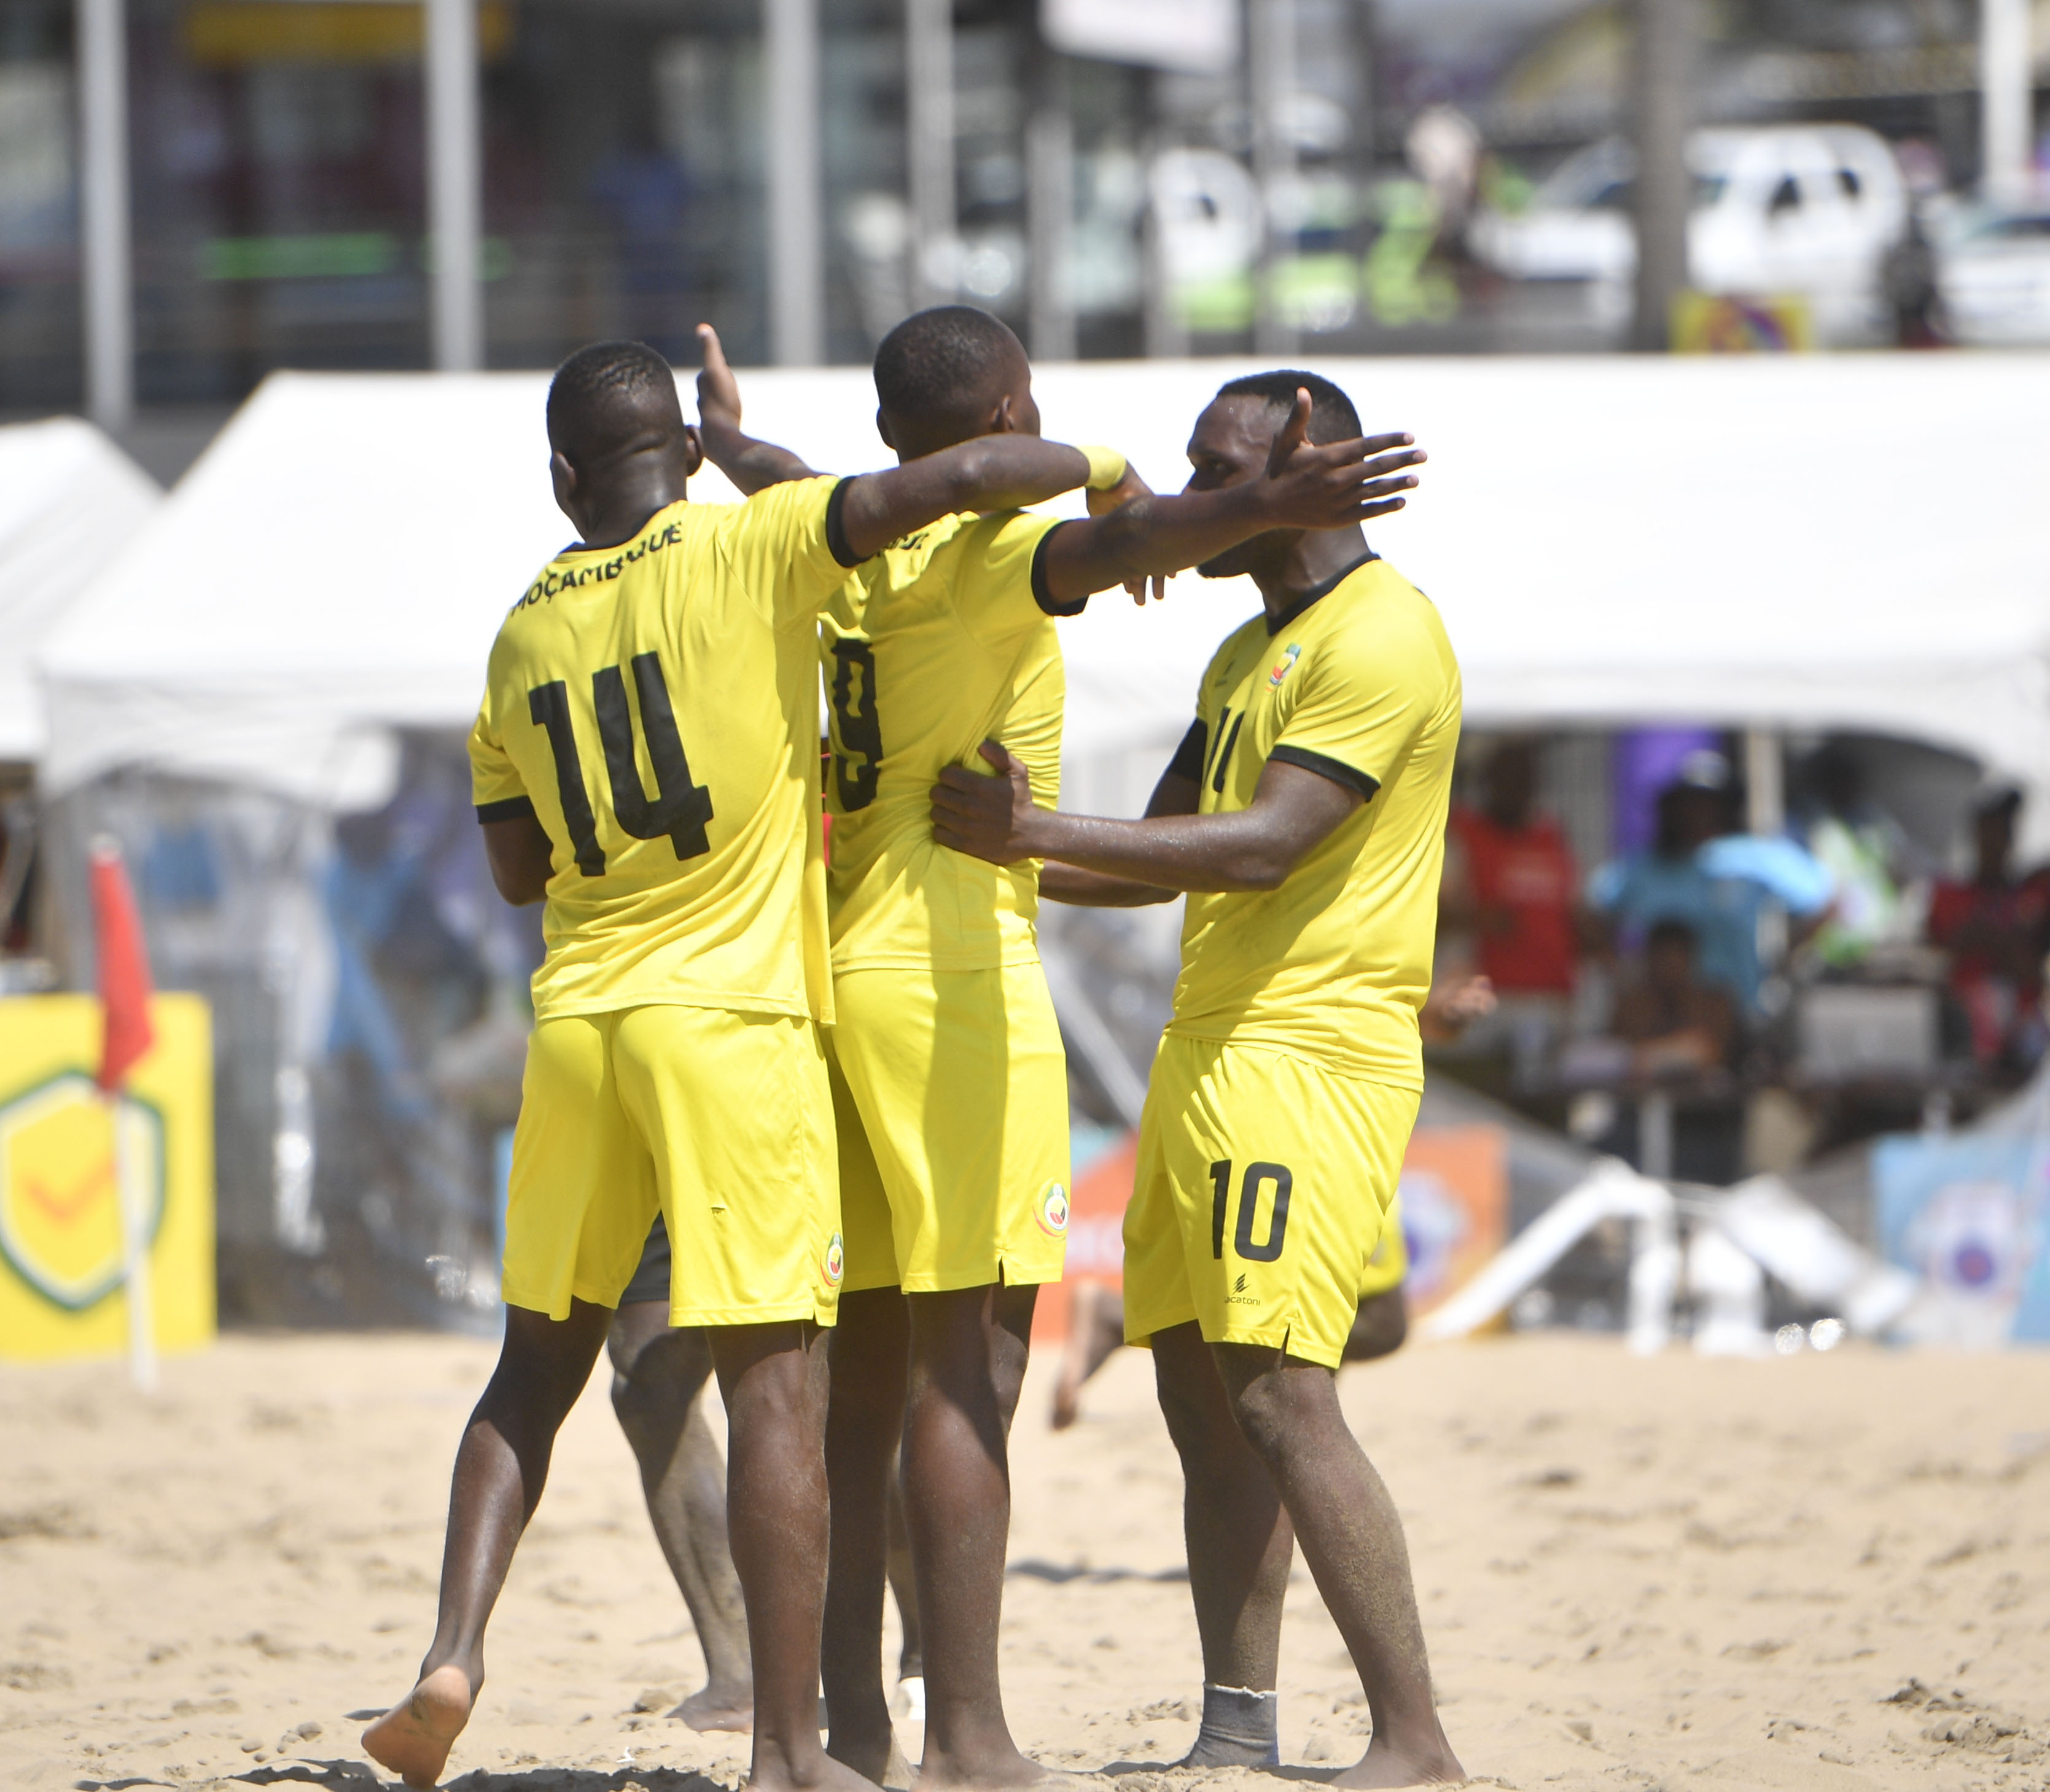 Beach Soccer is a beacon of hope in Mozambique – Saidate Abudo Moveia